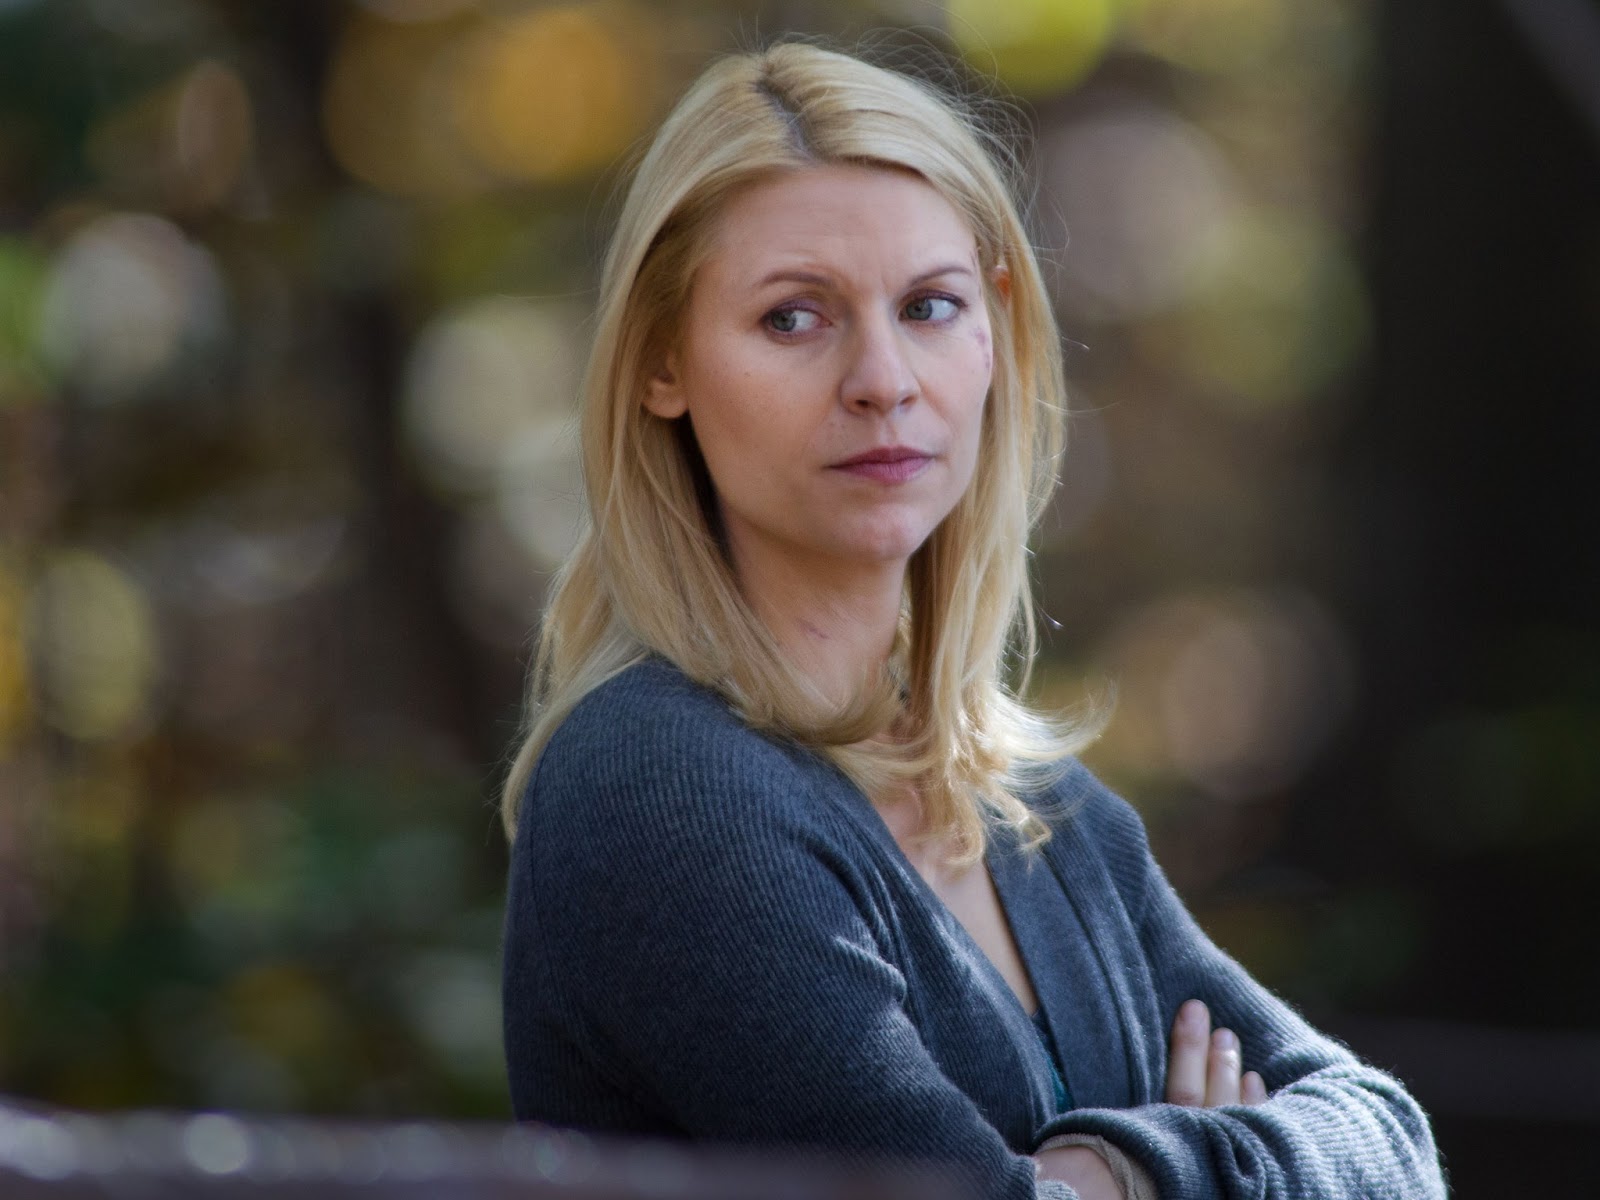 aboutnicigiri: Claire Danes as Carrie Mathison on Homeland